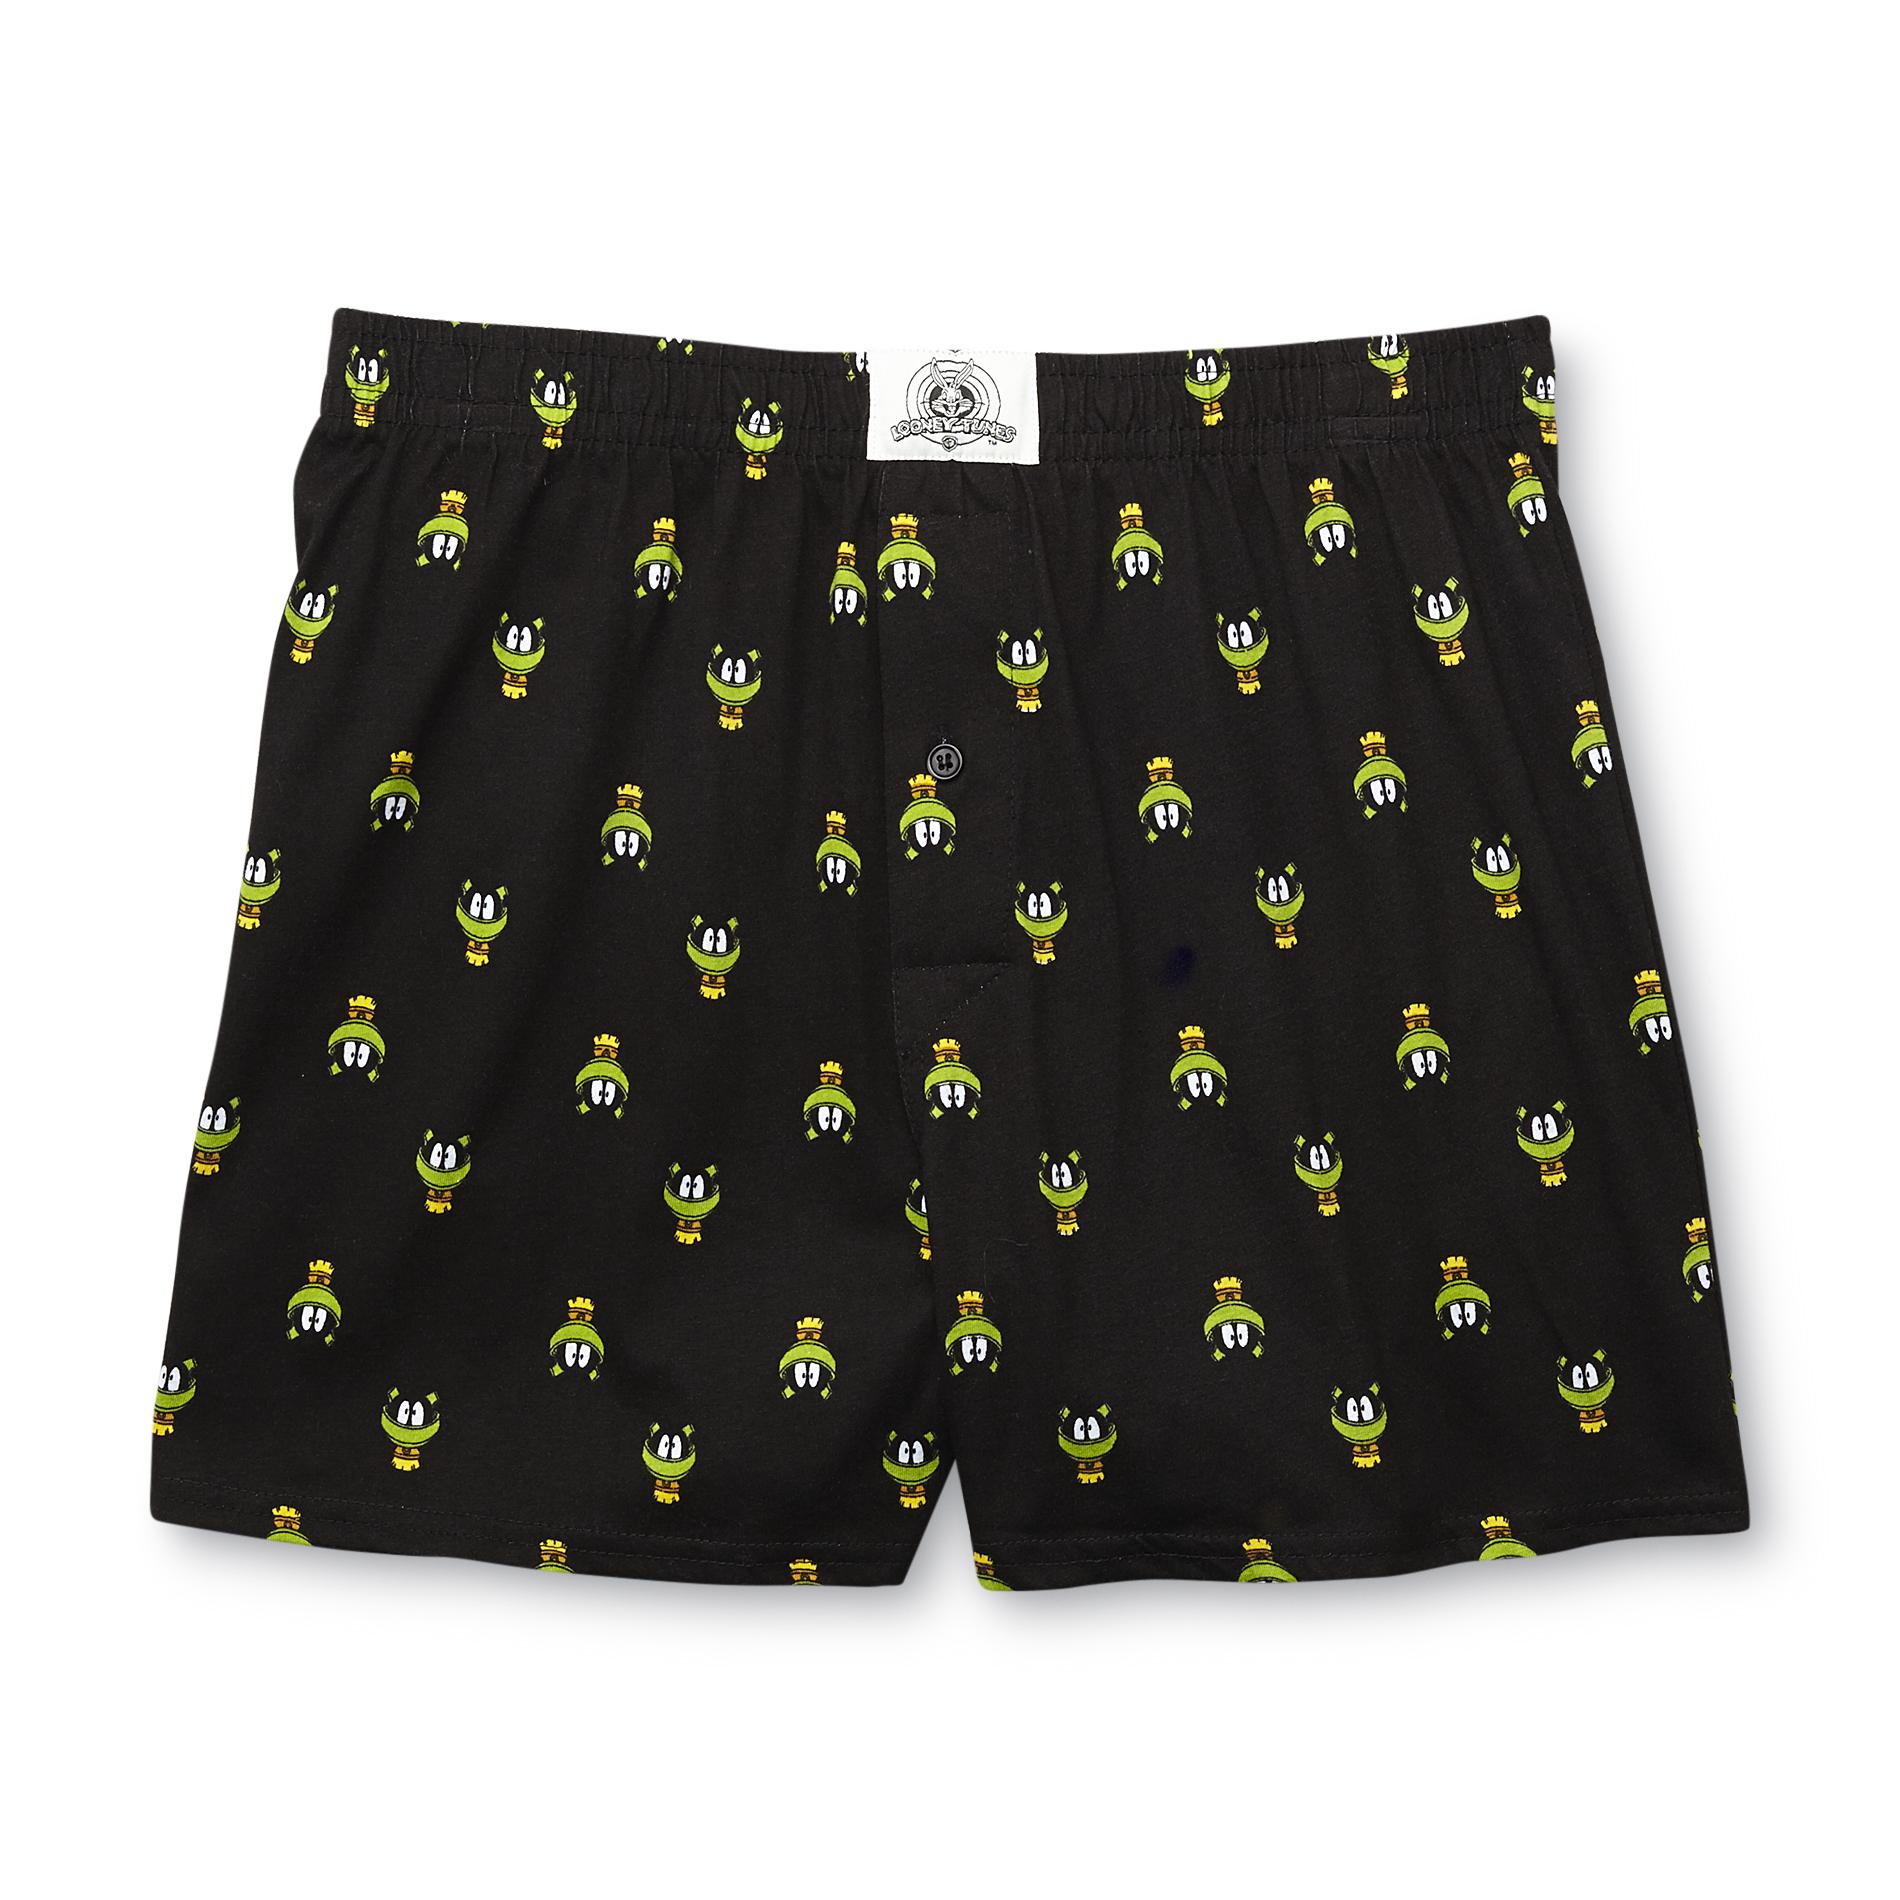 Warner Brothers Marvin The Martian Men's Boxer Shorts